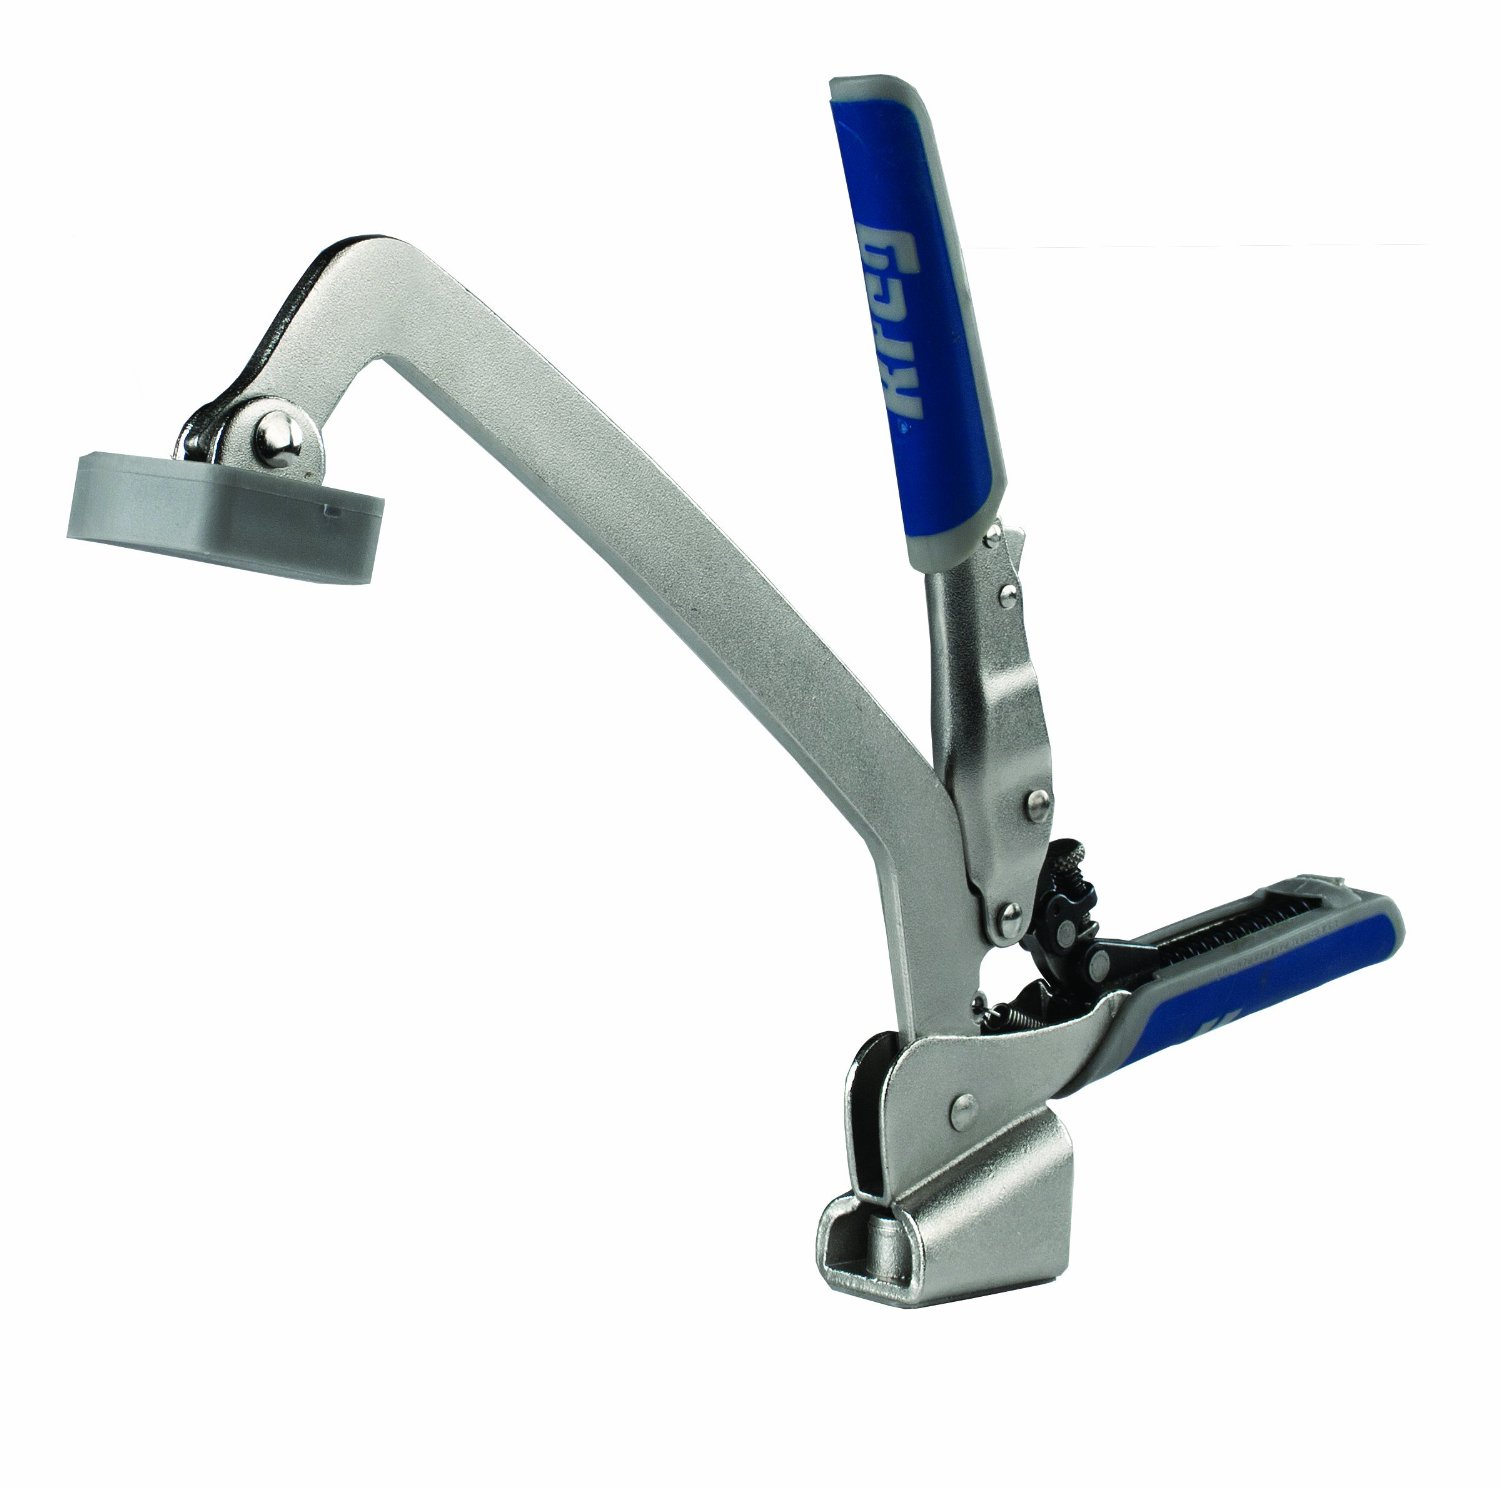 automaxx bench clamps from kreg make bench top clamping faster and 